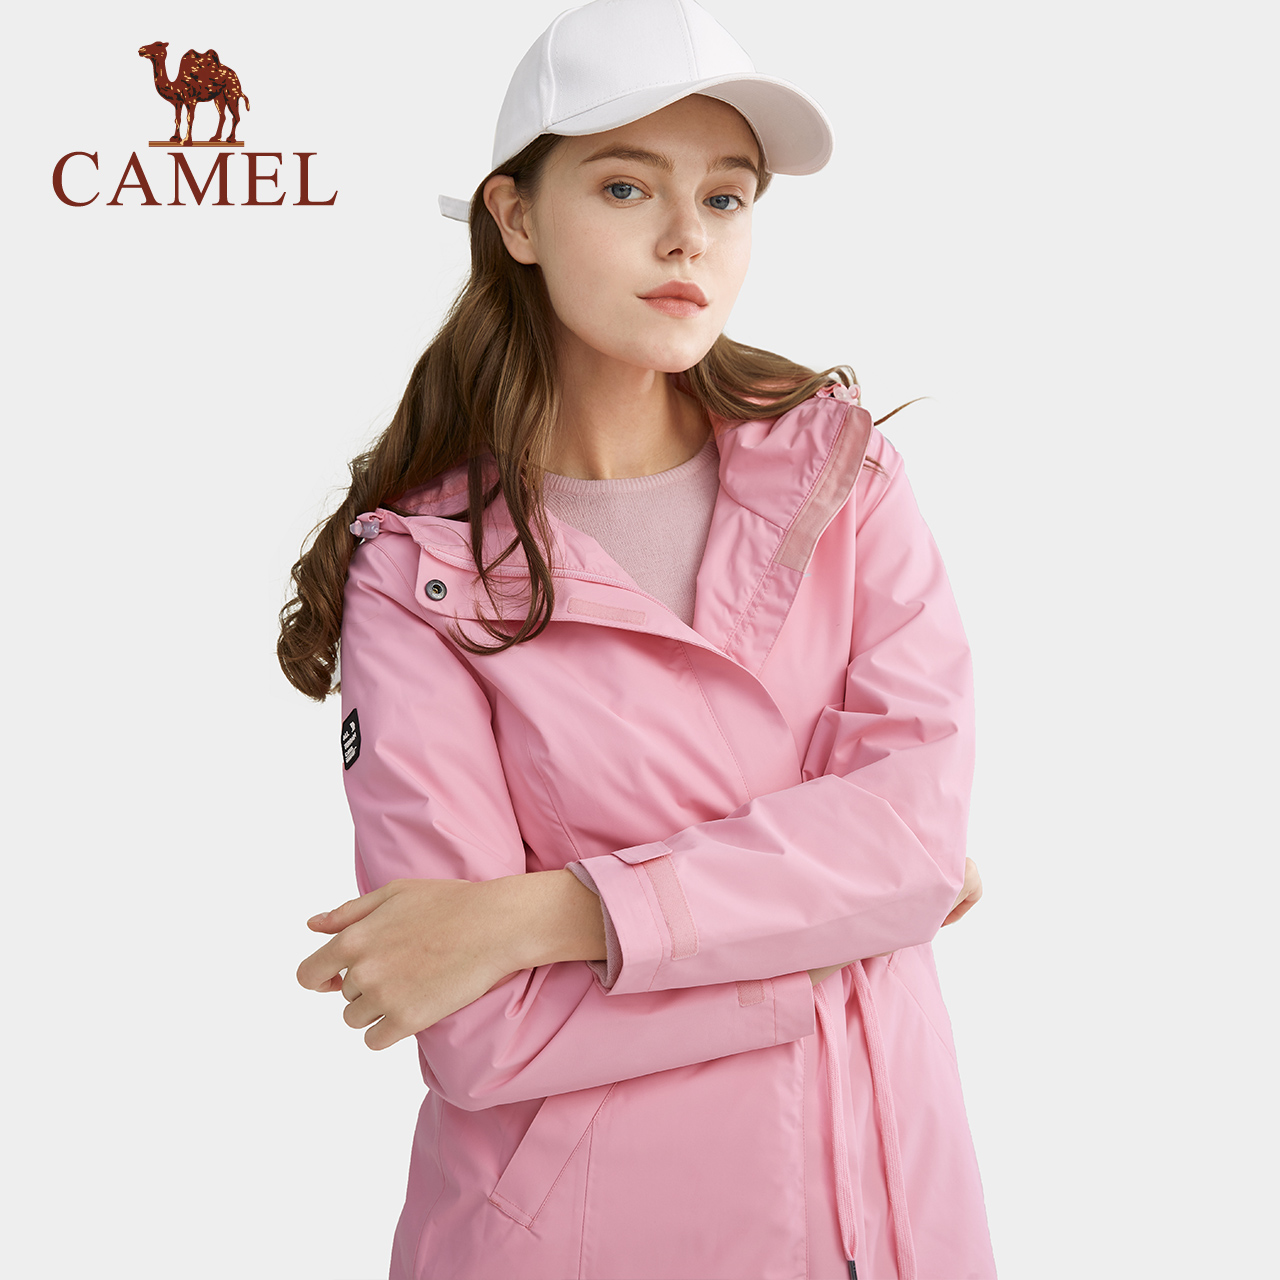 Camel Outdoor Charge Coat for Men and Women 2019 Autumn/Winter Single-layer Waterproof Windbreaker Fashion Brand Leisure Travel Coat